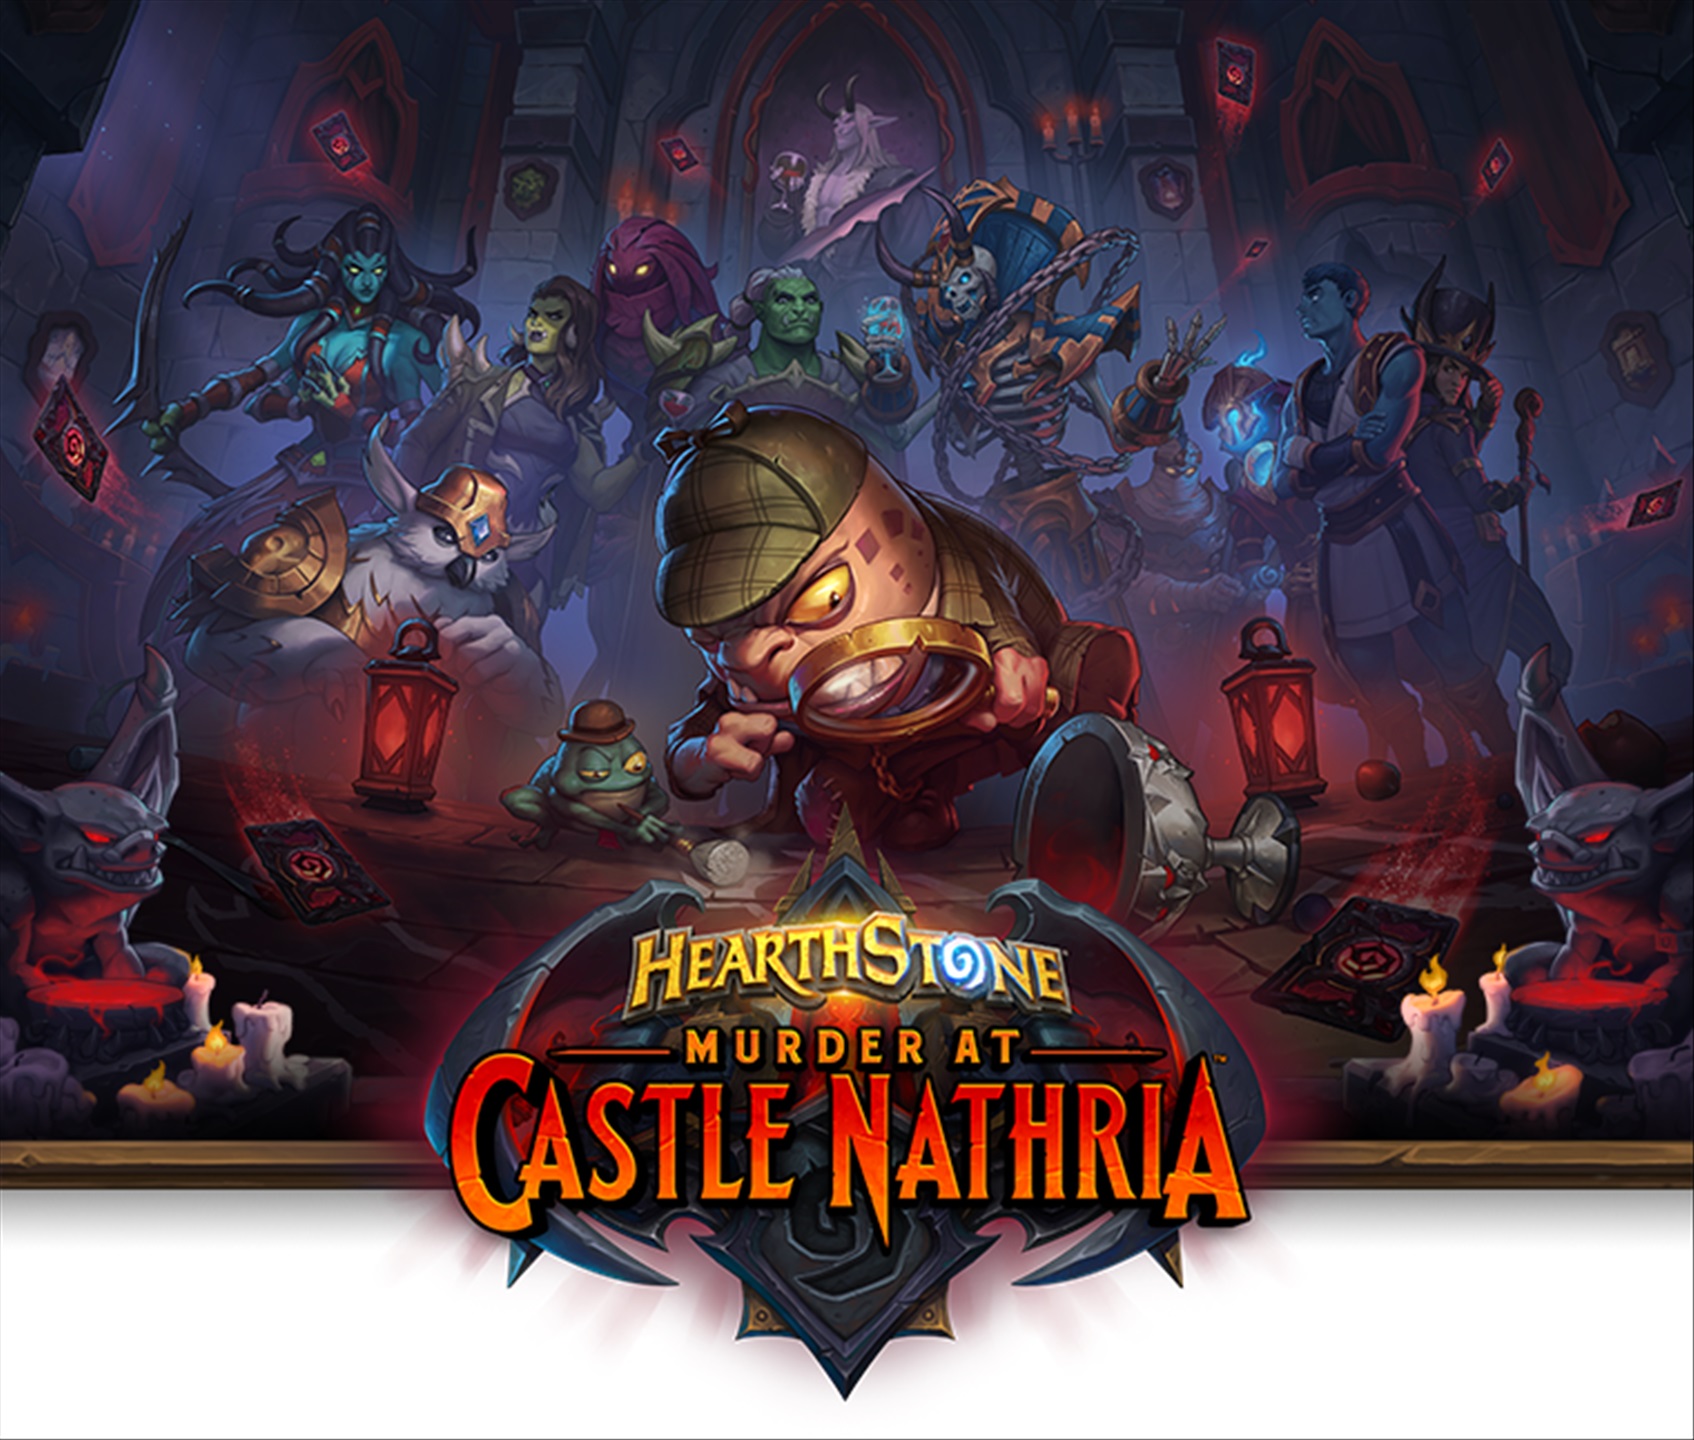 Hearthstone: Murder at Castle Nathria impressions